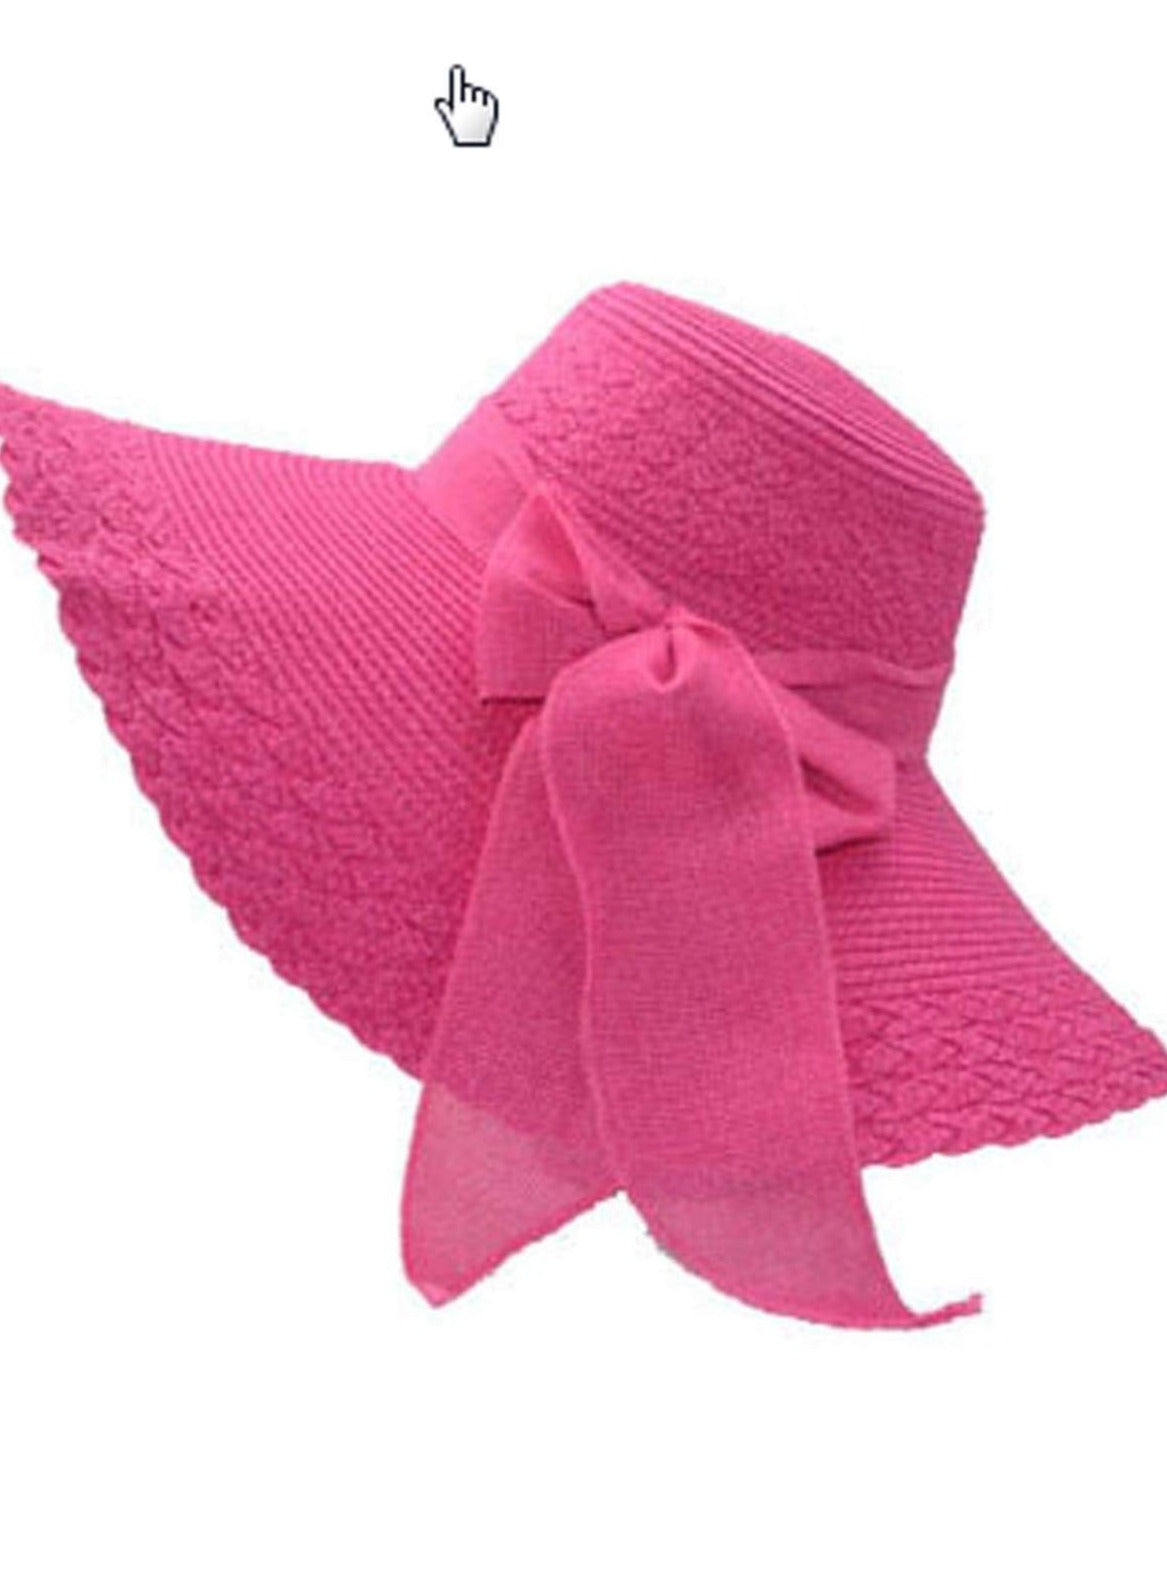 Womens Wide Brim Floppy Hat With Large Ribbon - Hot Pink - Womens Accessories